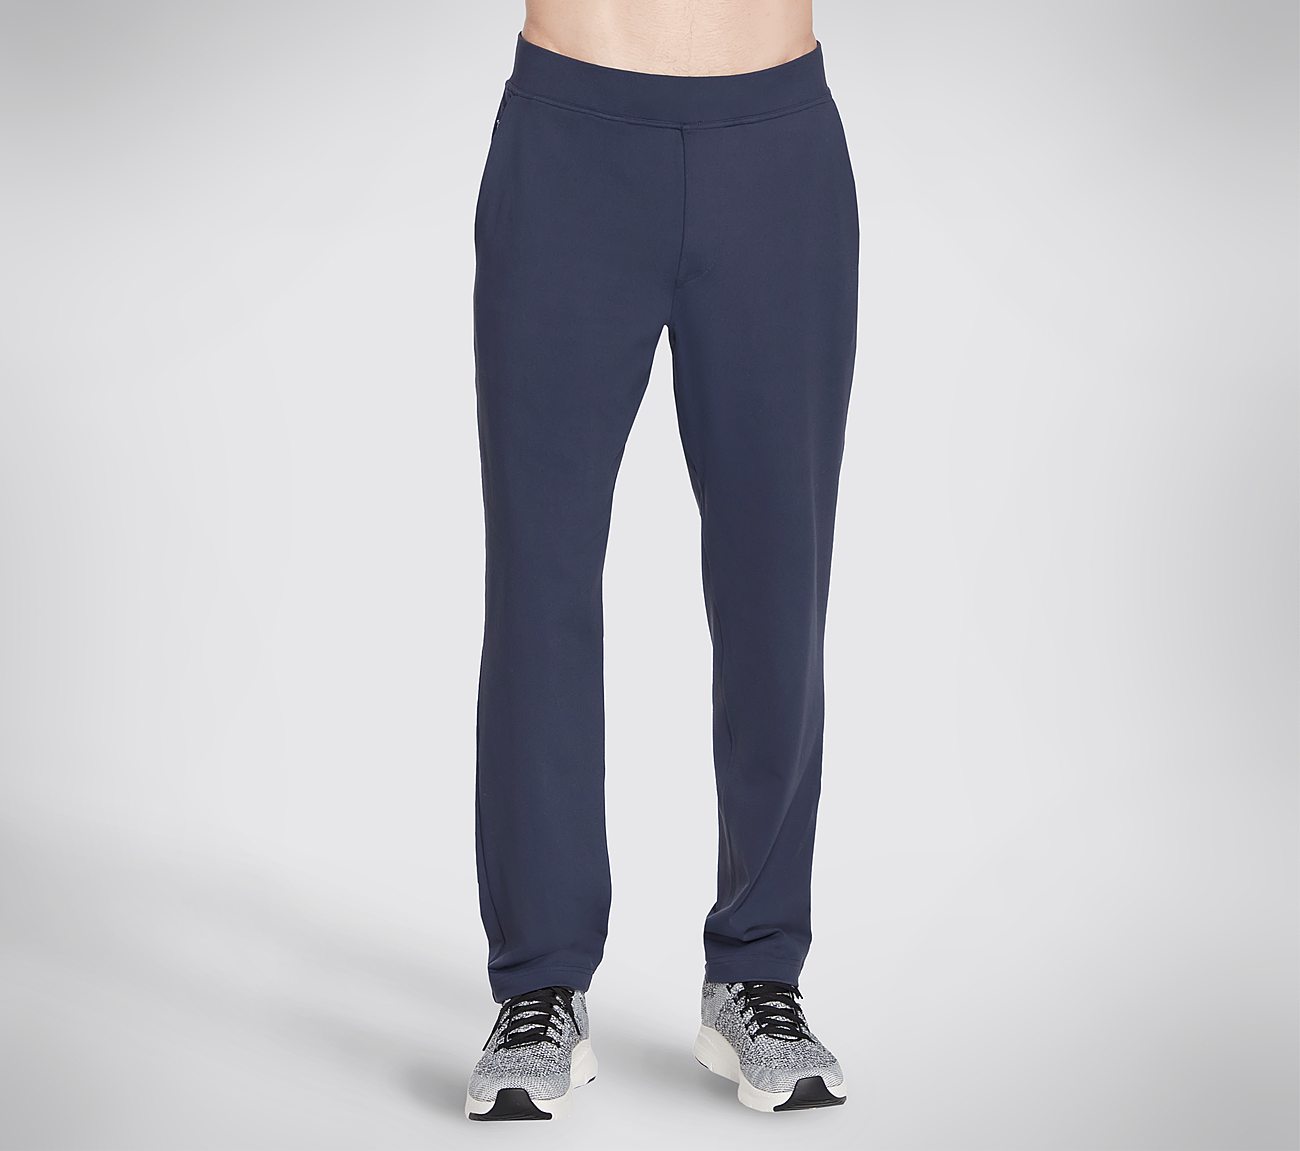 THE GOWALK PANT RECHARGE, NNNAVY Apparels Lateral View